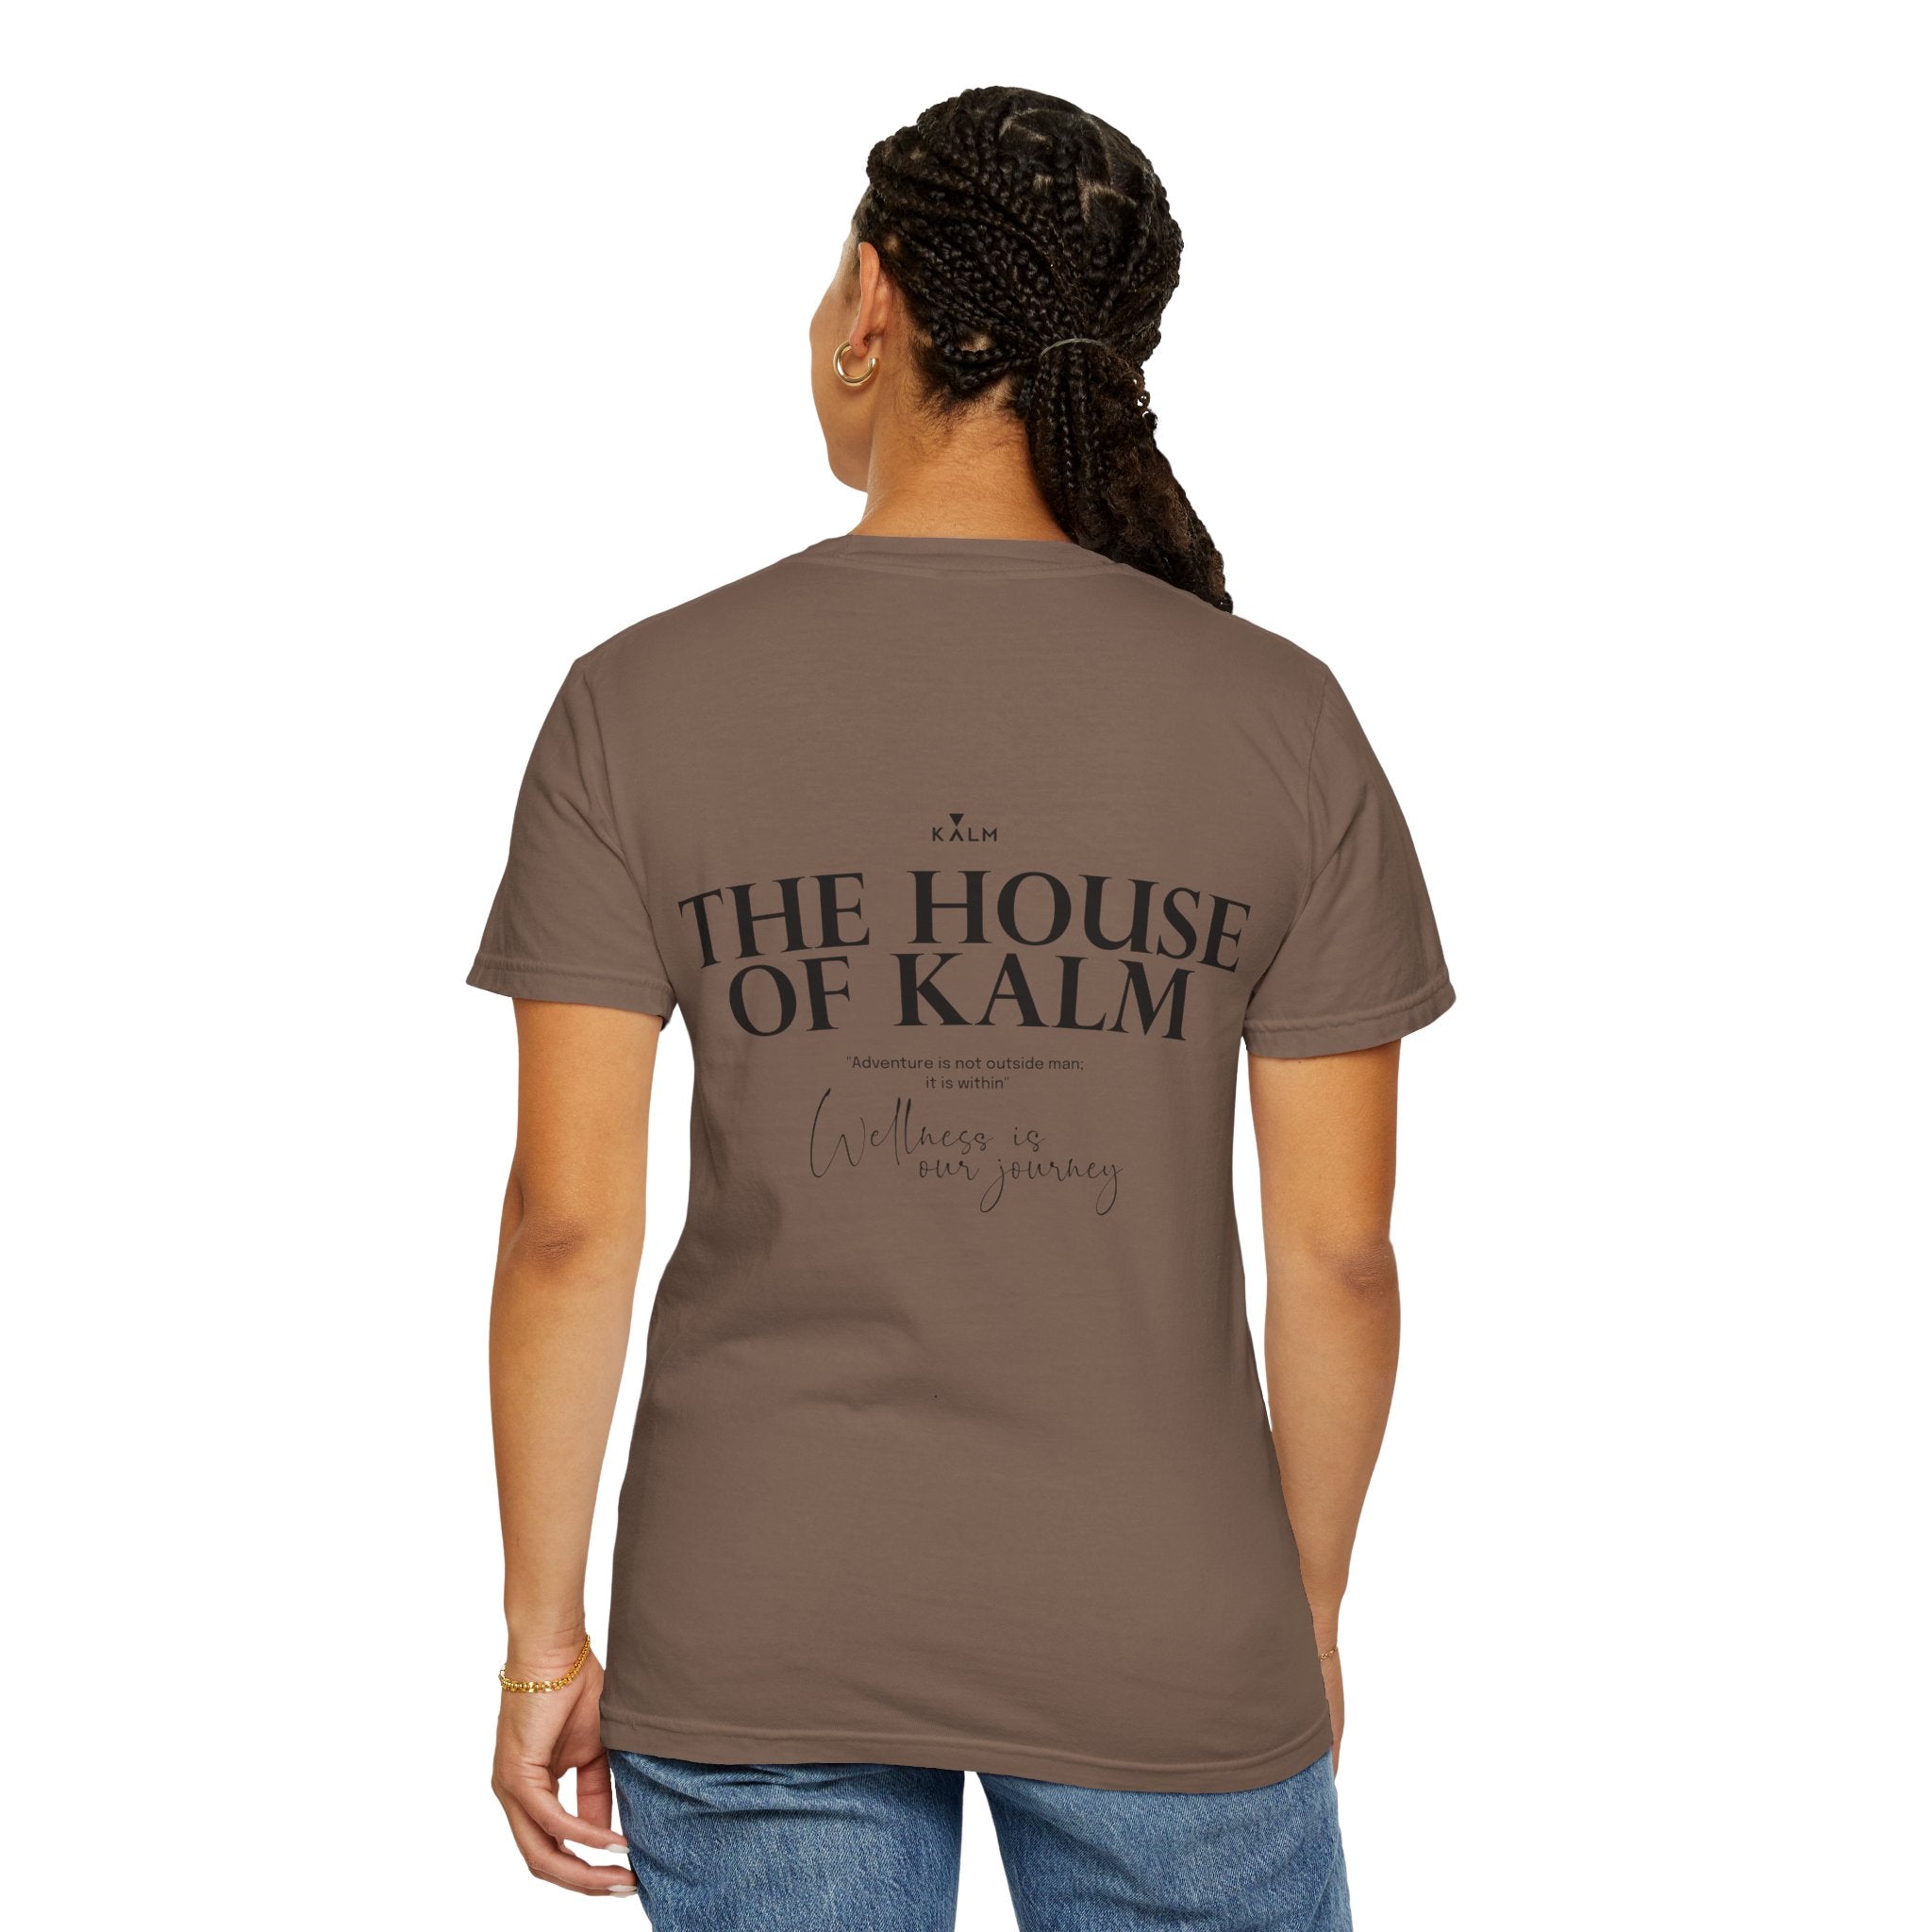 The House of Kalm Garment-Dyed T-shirt